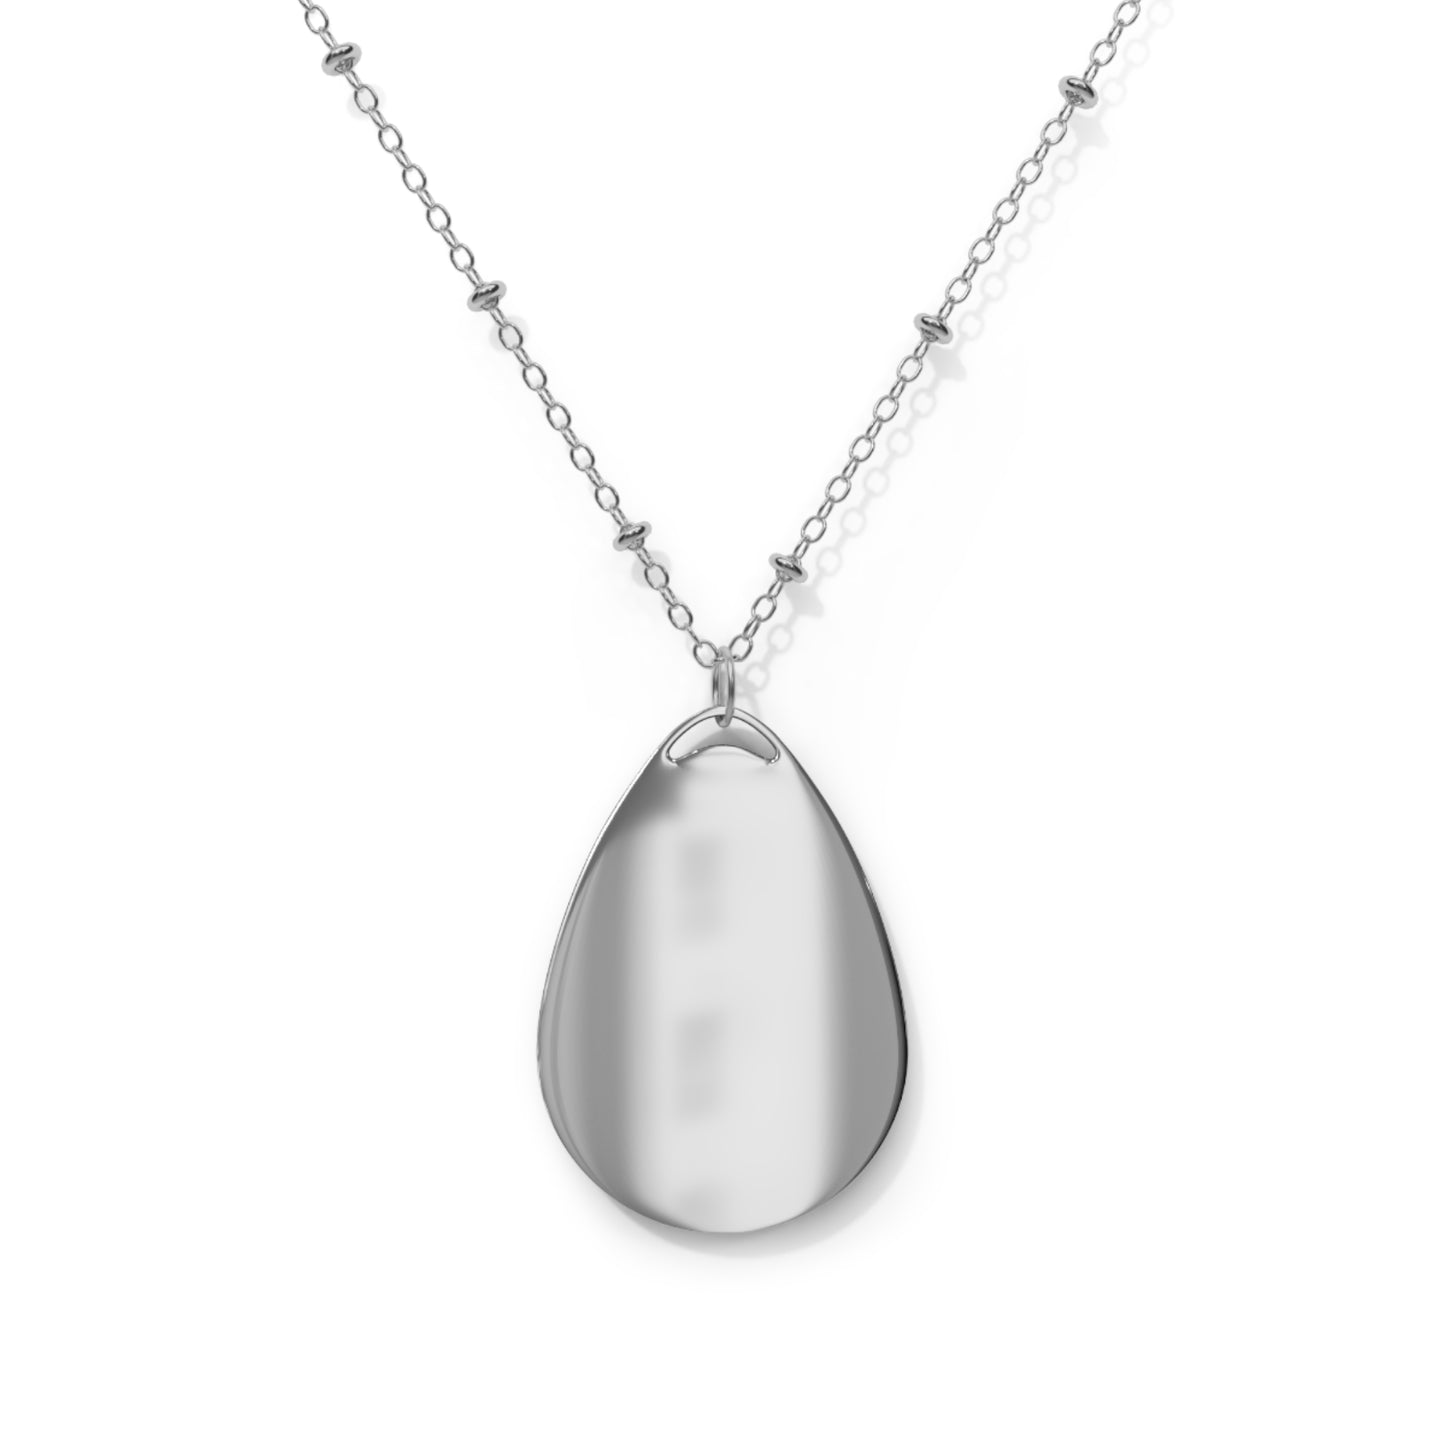 Oval Necklace - Caldwell 2